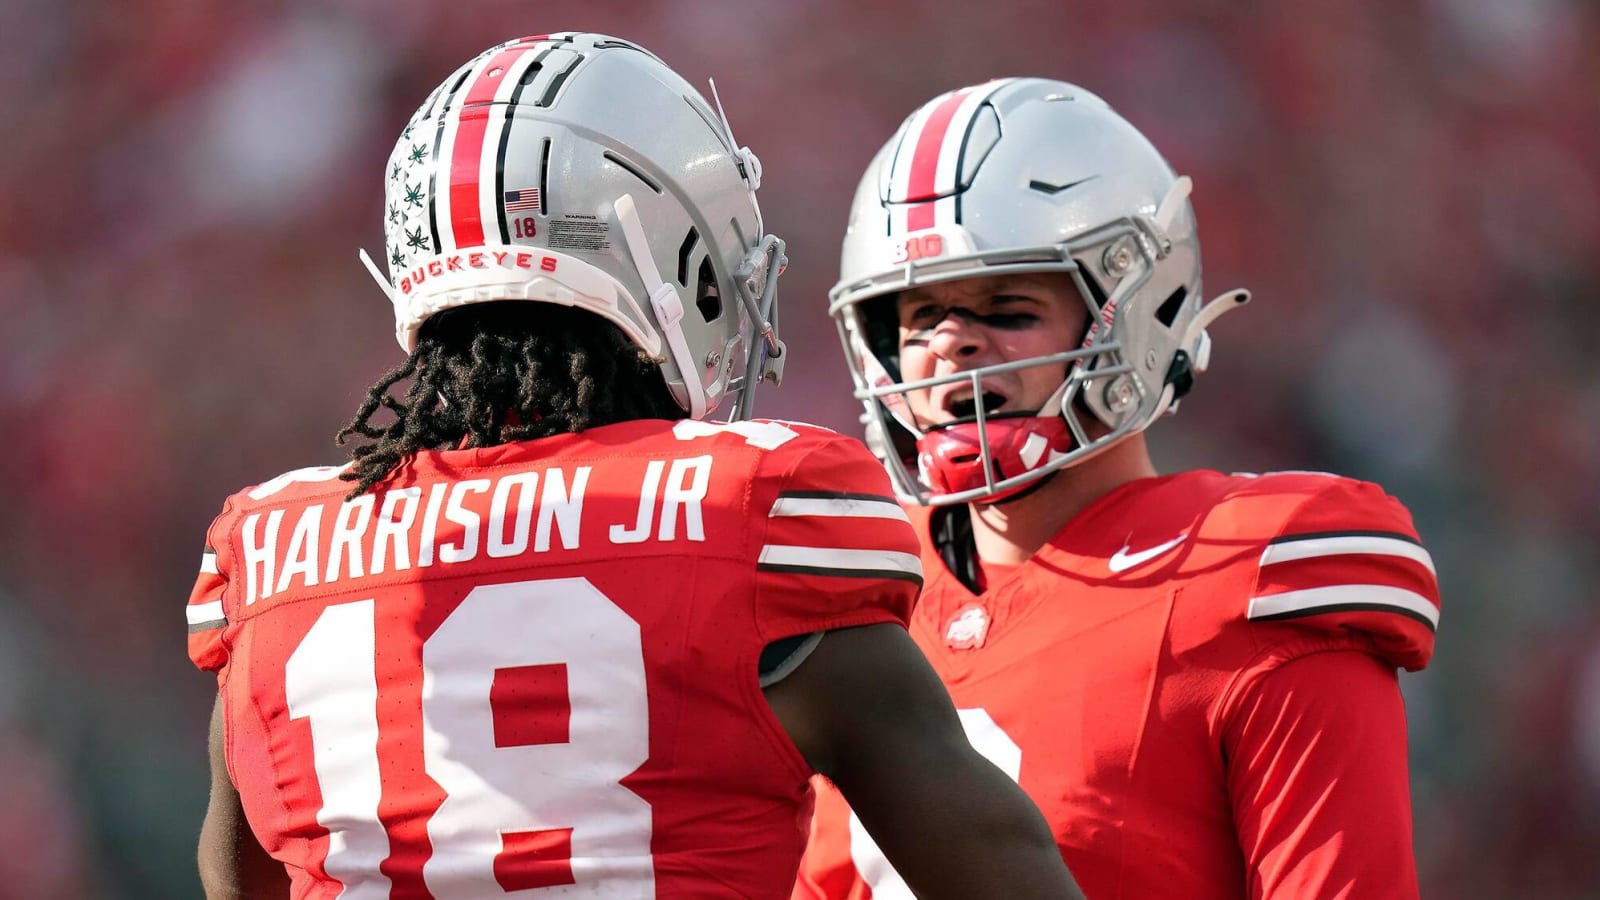 Ohio State's Kyle McCord would cast hypothetical Heisman vote for Marvin Harrison Jr.